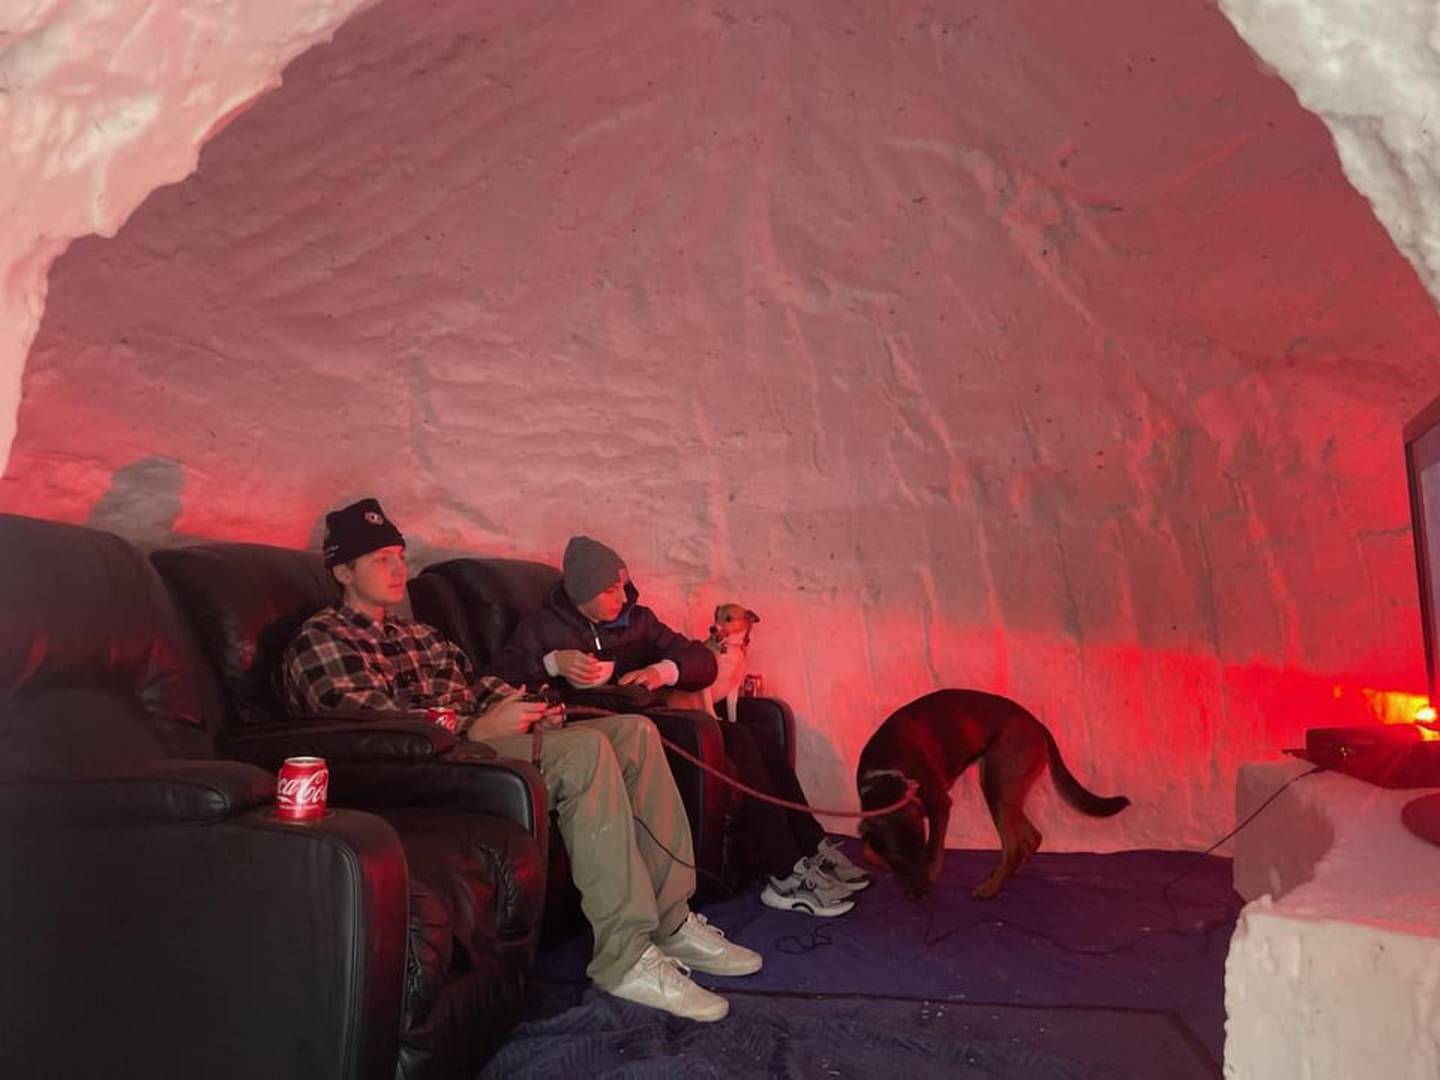 For the last five years, Lee Peters of Plainfield has built an igloo in the yard of his home. He used to build them with his father and sister when growing up and wanted to pass the skill to his own children. Lee's sons Tyler Peters, 21, and Cole Peters, 13, like to hang out in the igloo with the family’s dogs Gizmo and Bear.